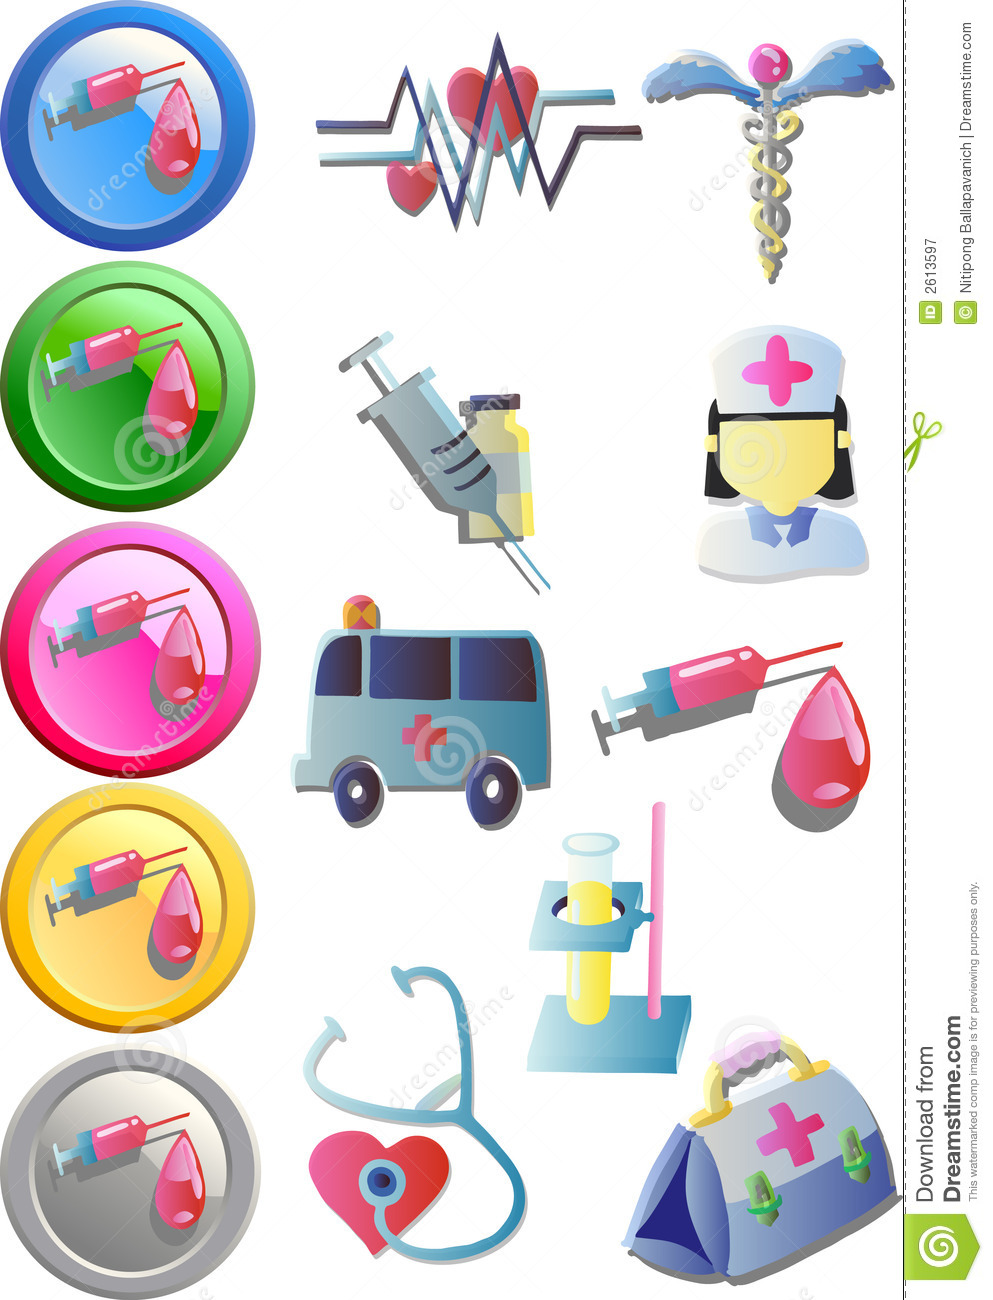 Free clipart medical images - .